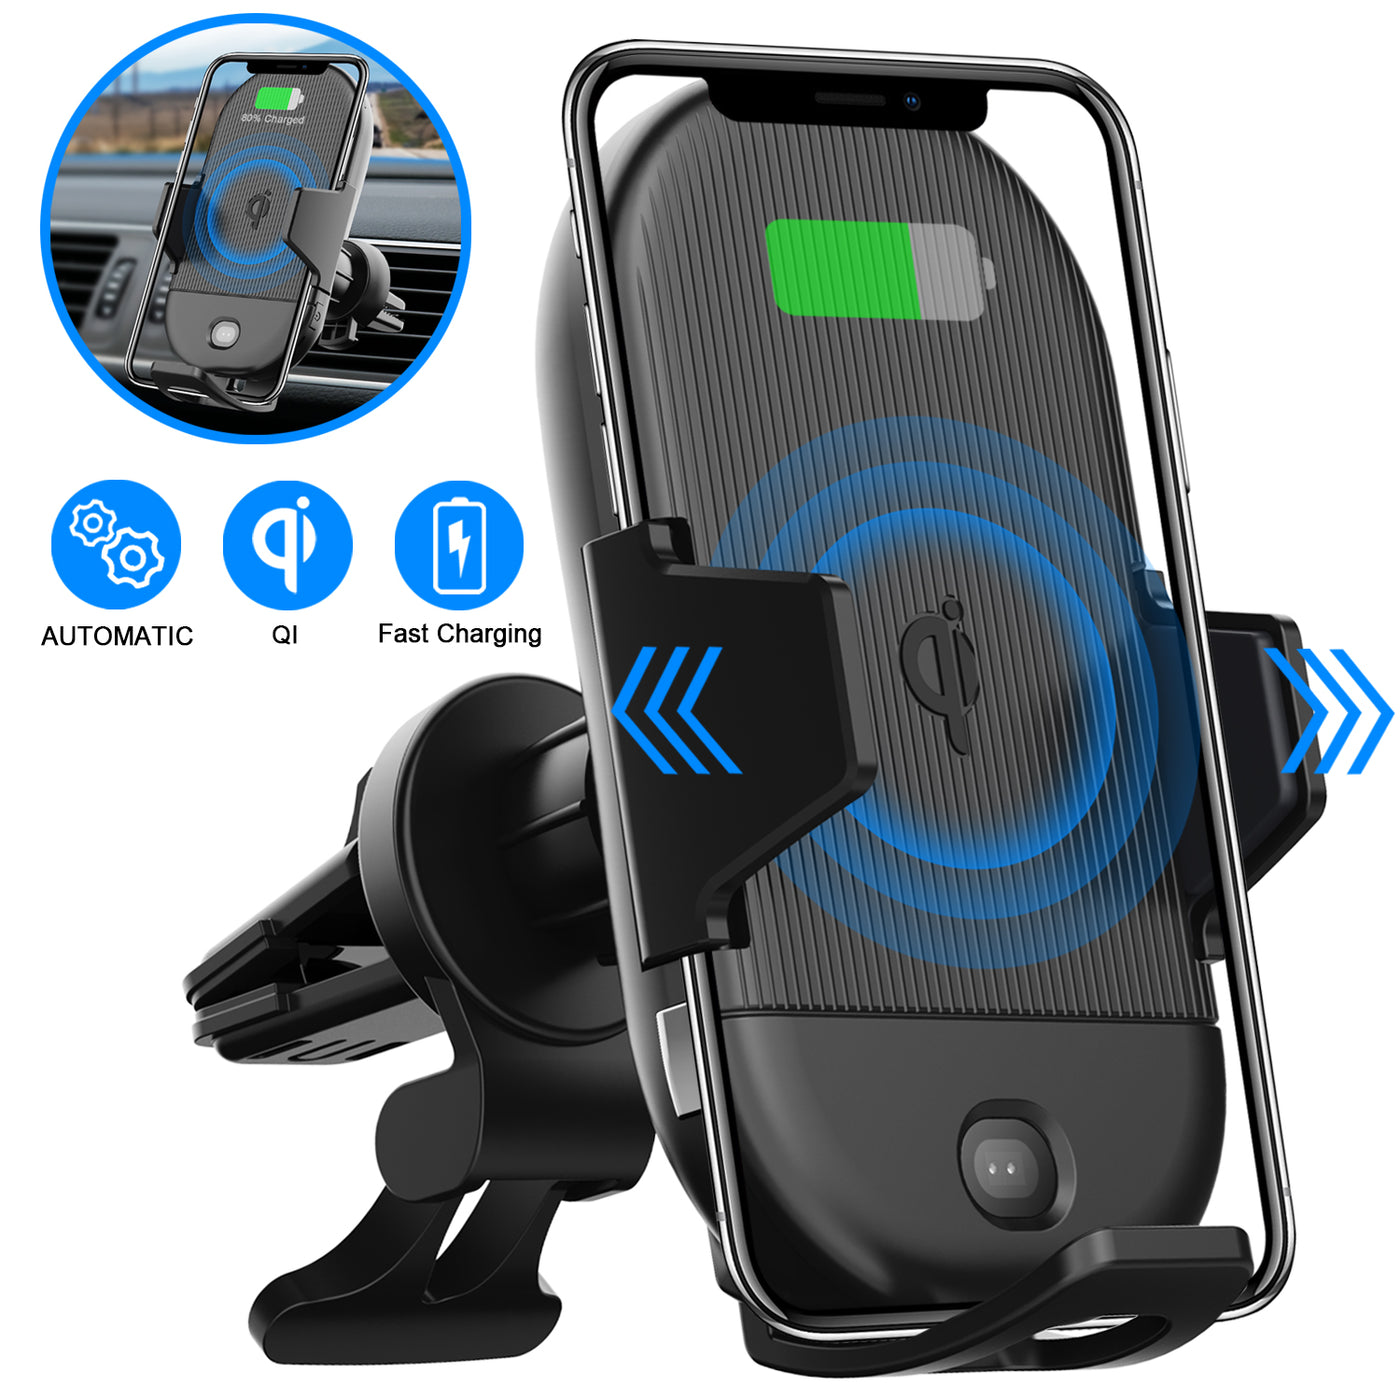 LETSCOM Line B Wireless Car Charger, Auto-Clamping, 15W Qi Fast